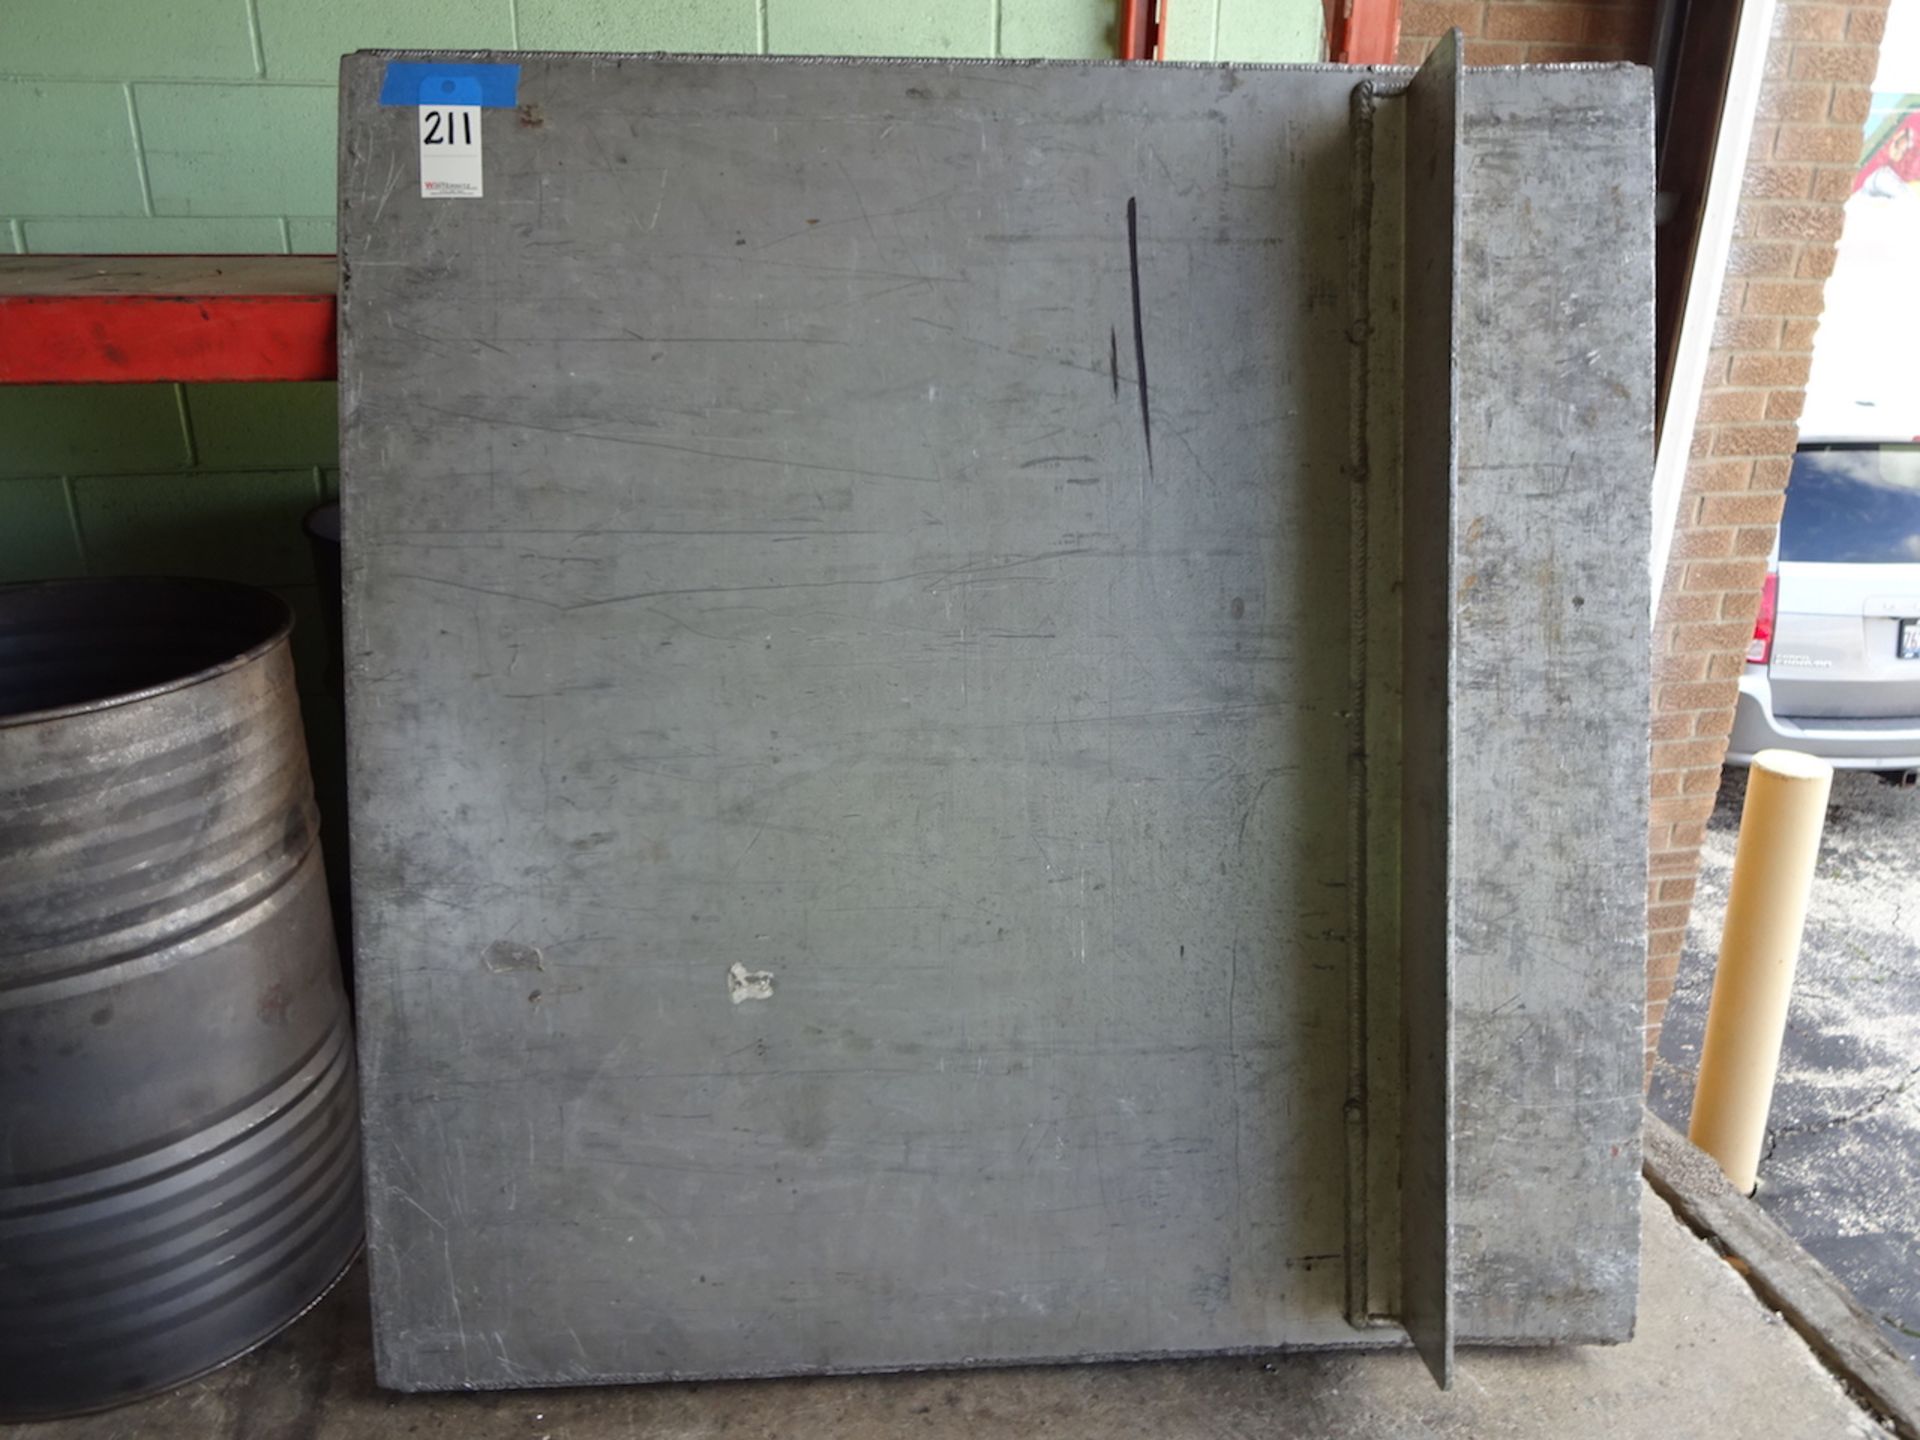 55 X 60 IN ALUMINUM DOCK PLATE - Image 2 of 2